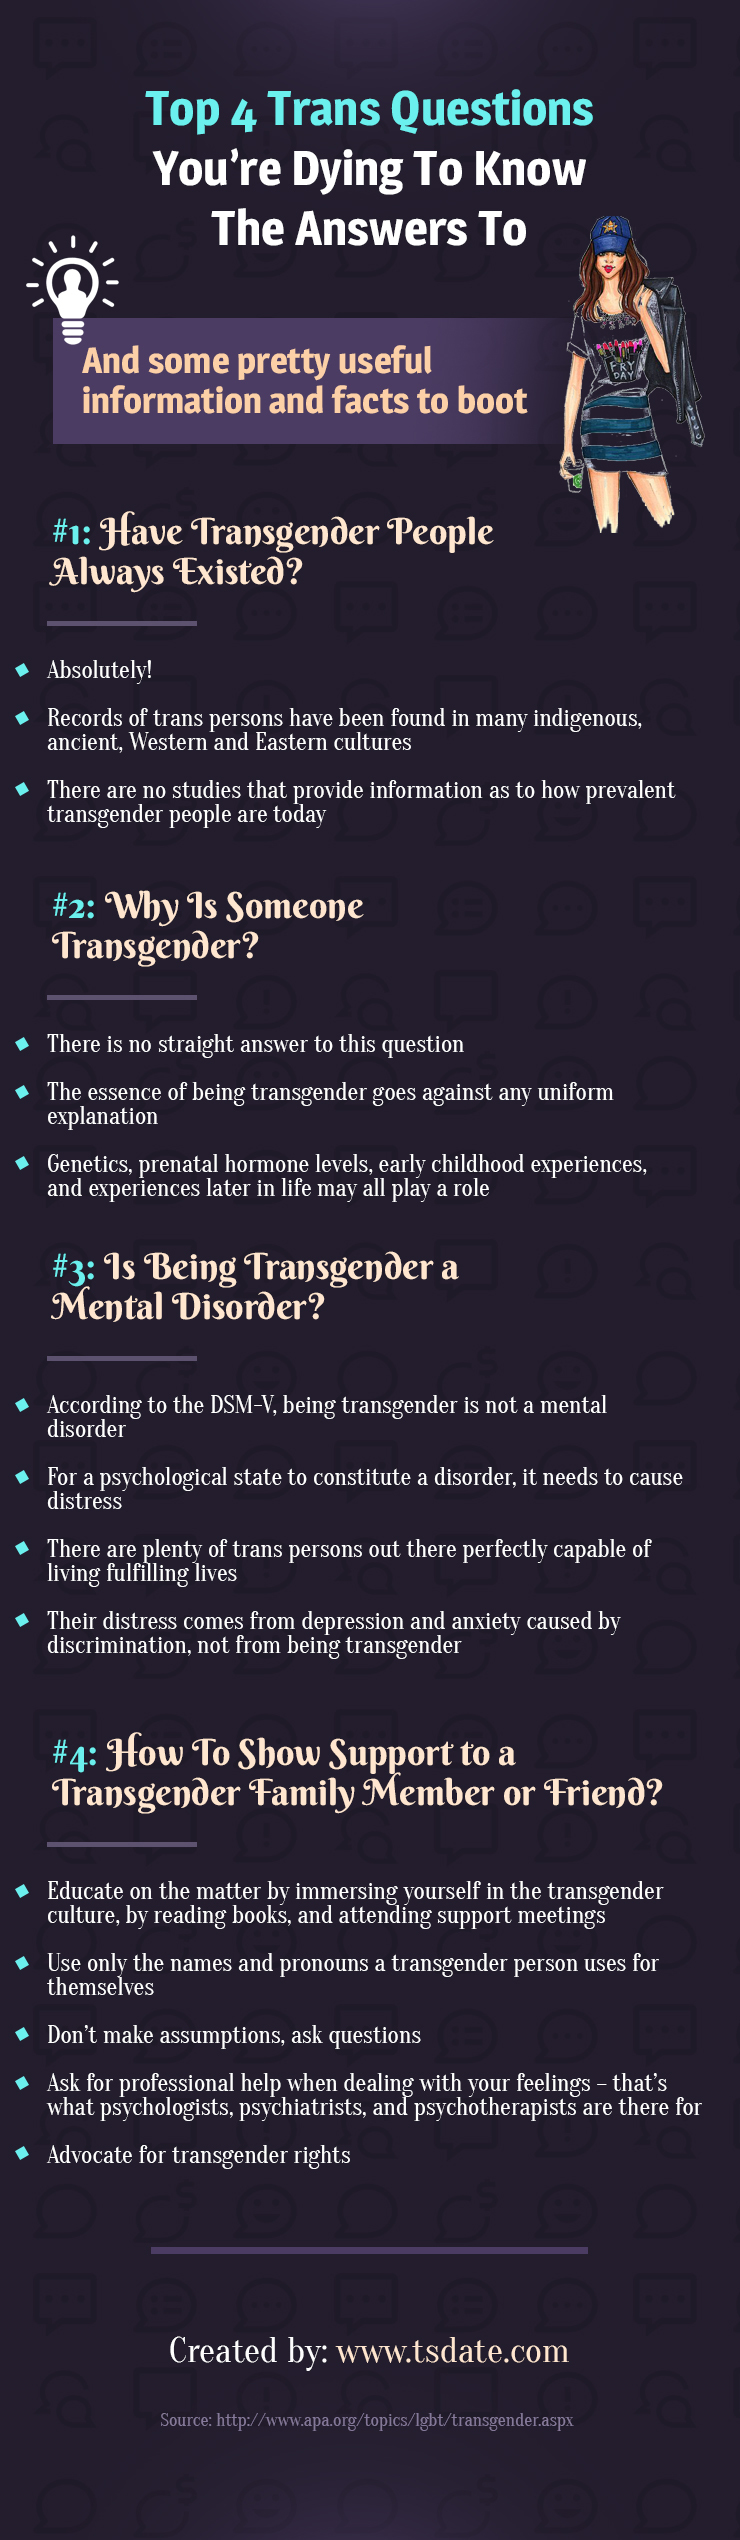 Top 4 Trans Questions You’re Dying To Know The Answers To